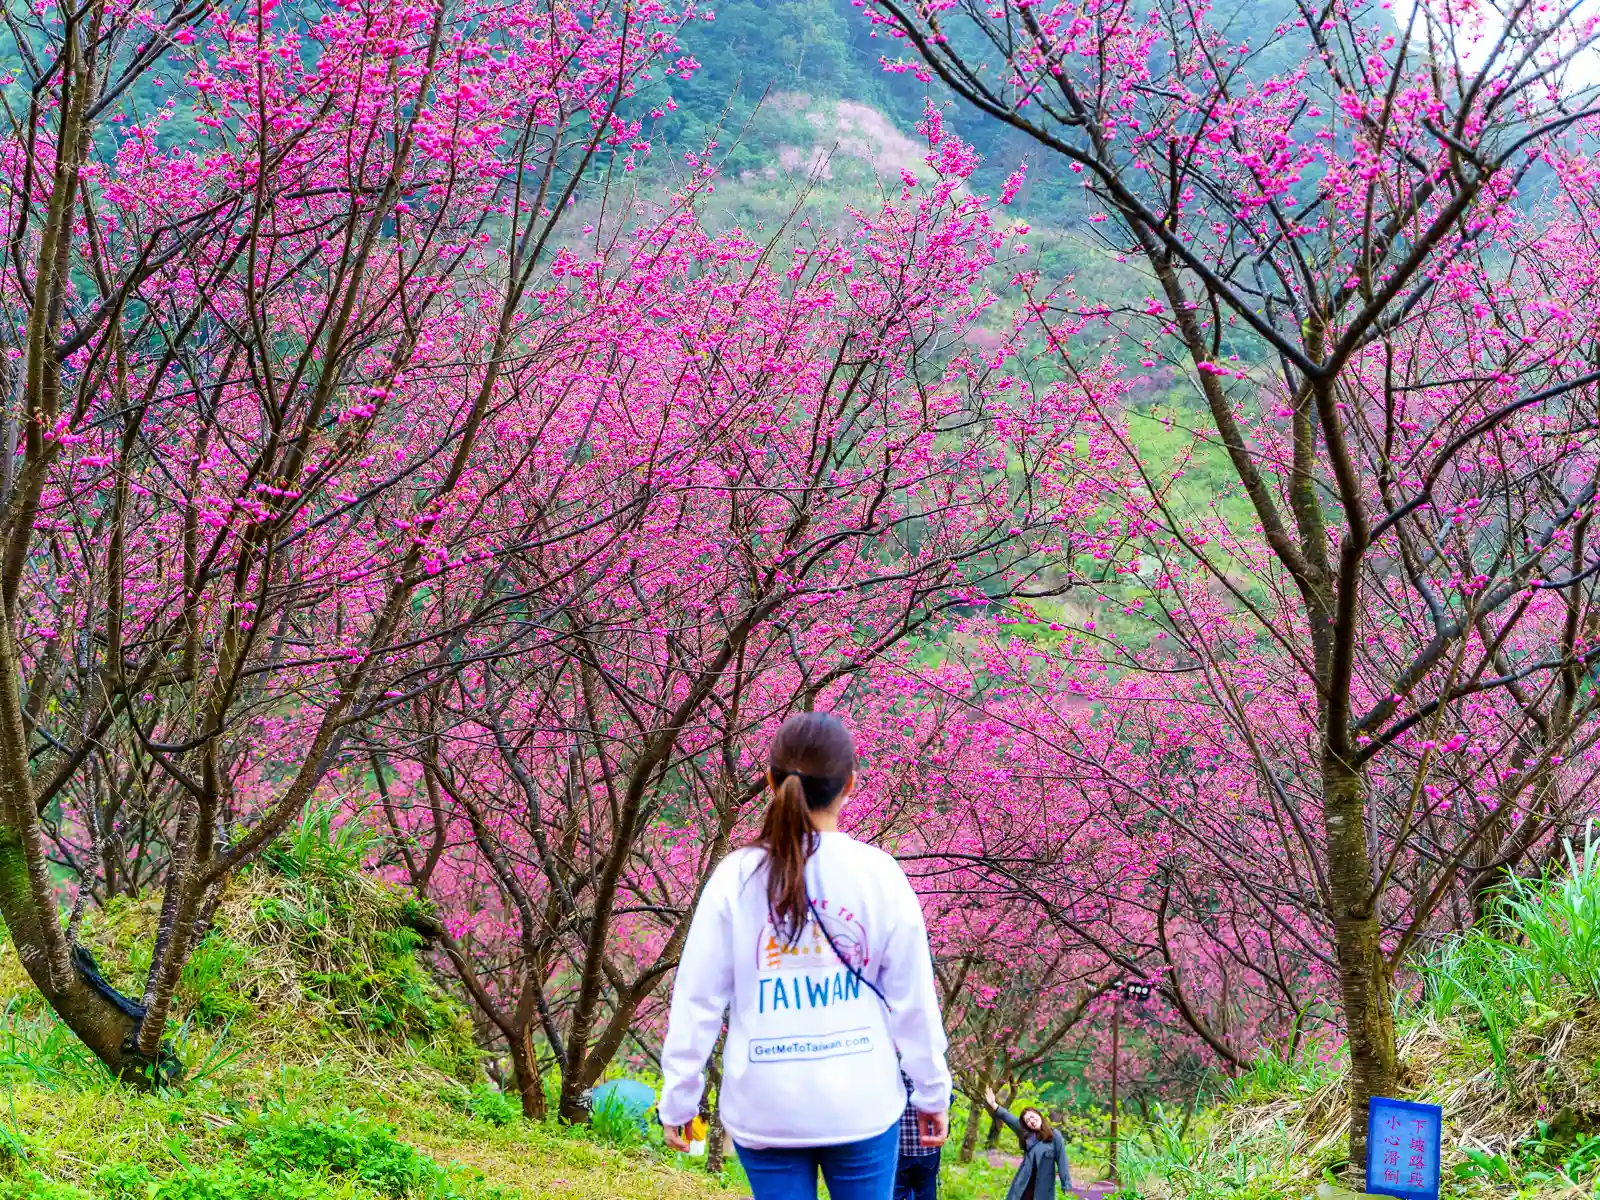 A tourist walks down a path surrounded by red cherry blossoms.